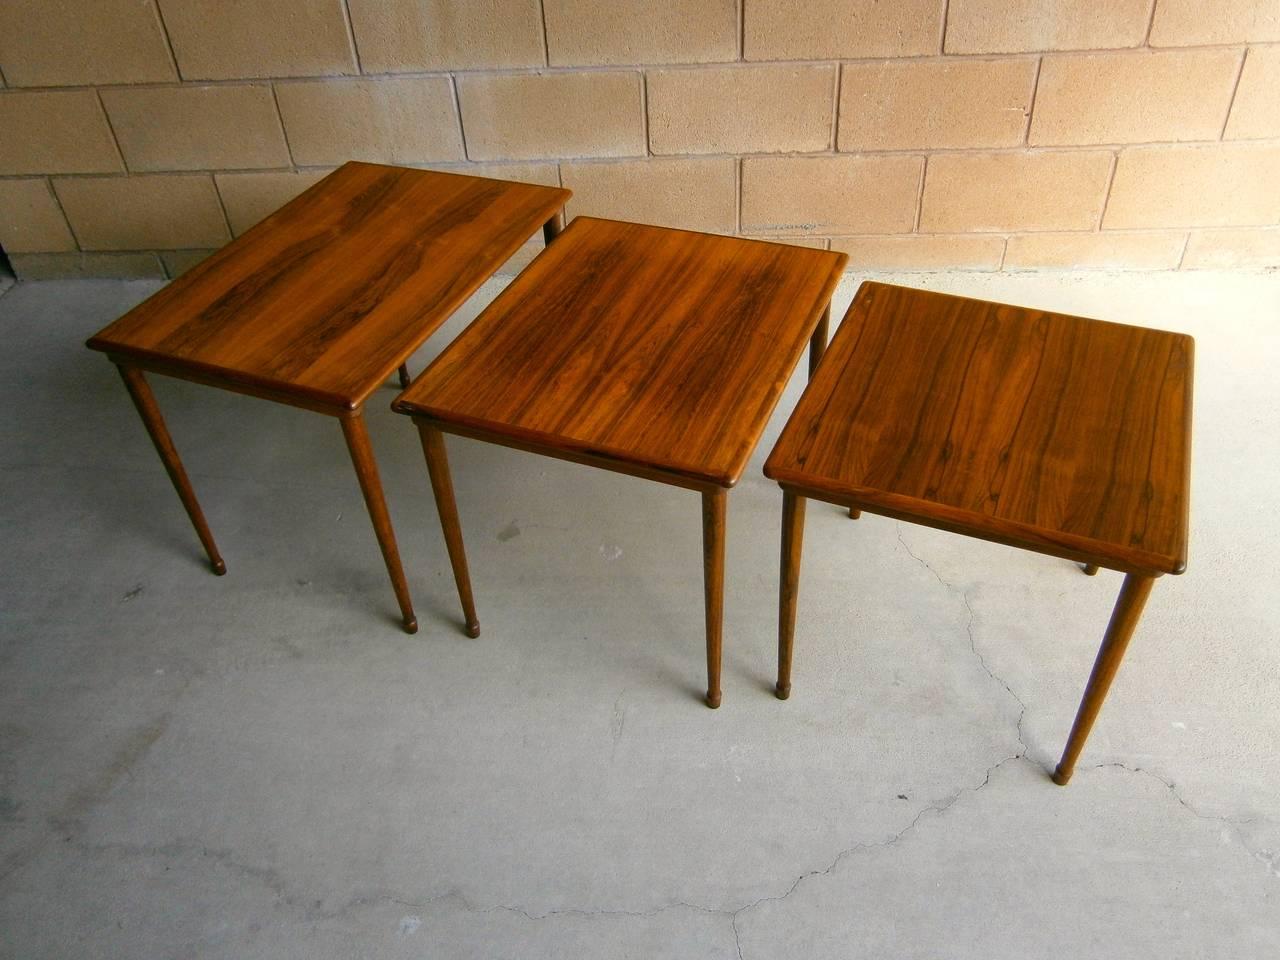 A trio of rosewood stacking tables made in Norway by Brode Blindheim in the 1960s. The tables are a combination of solid rosewood and rosewood veneer and retain the luminance the rosewood develops over time. The dimensions in the listing are for the